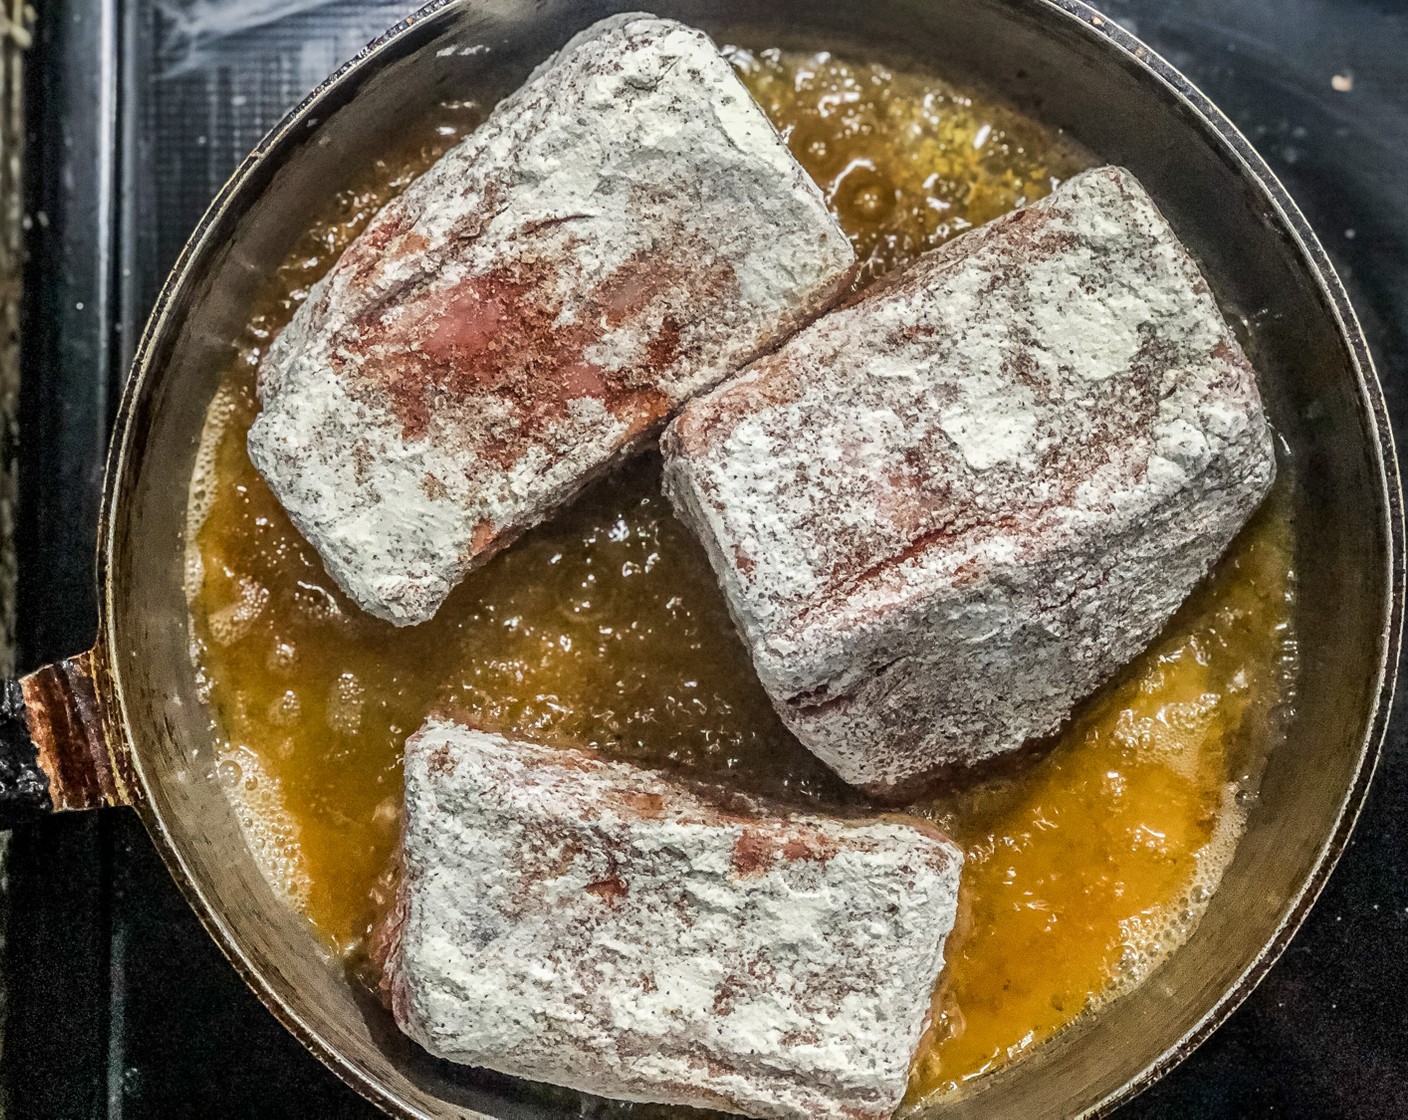 step 4 Dust short ribs in the flour. Once the oil is hot (add a pinch of flour if it sizzles slowly it’s hot) cook them in batches for 1 minute on each side.